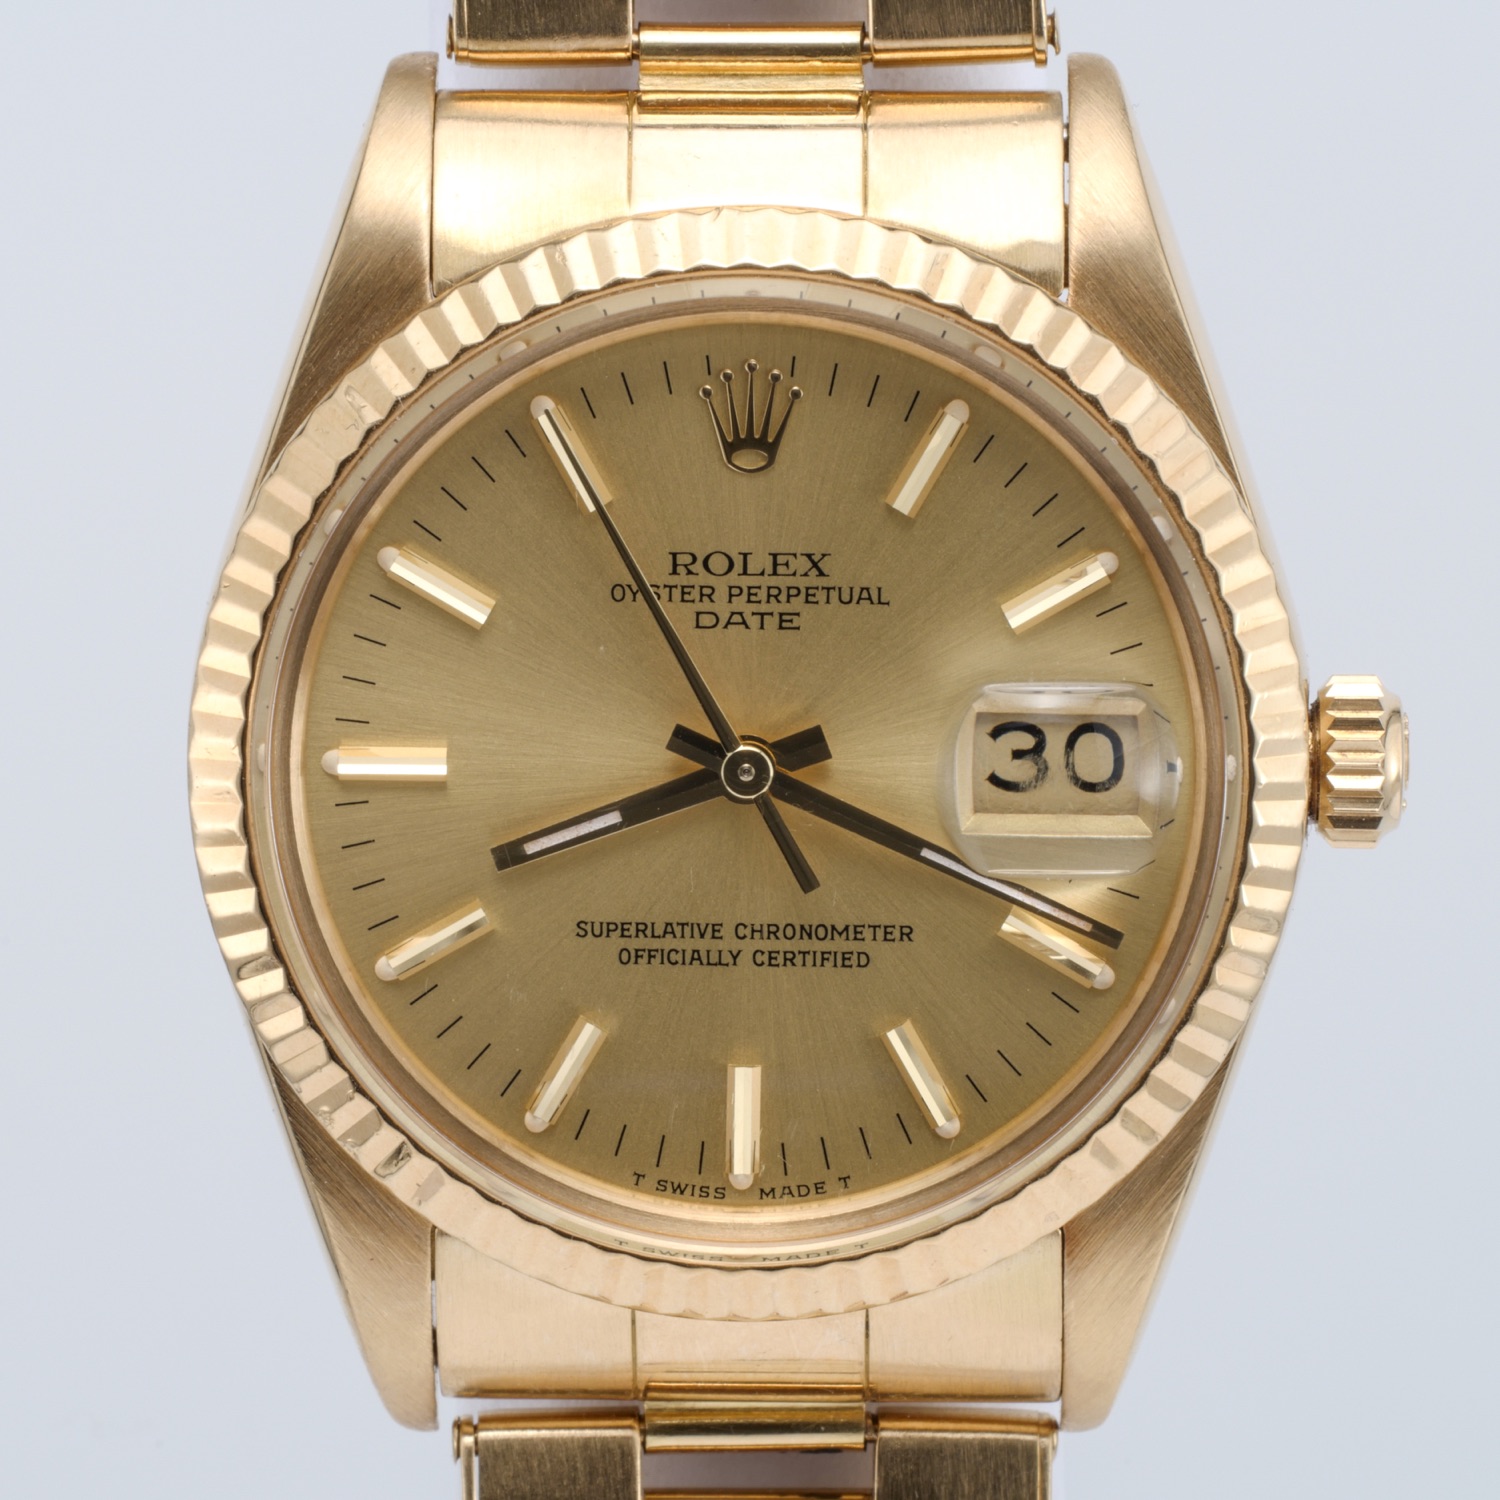 Rolex Oyster Perpetual Date "Buick" Ref 15038